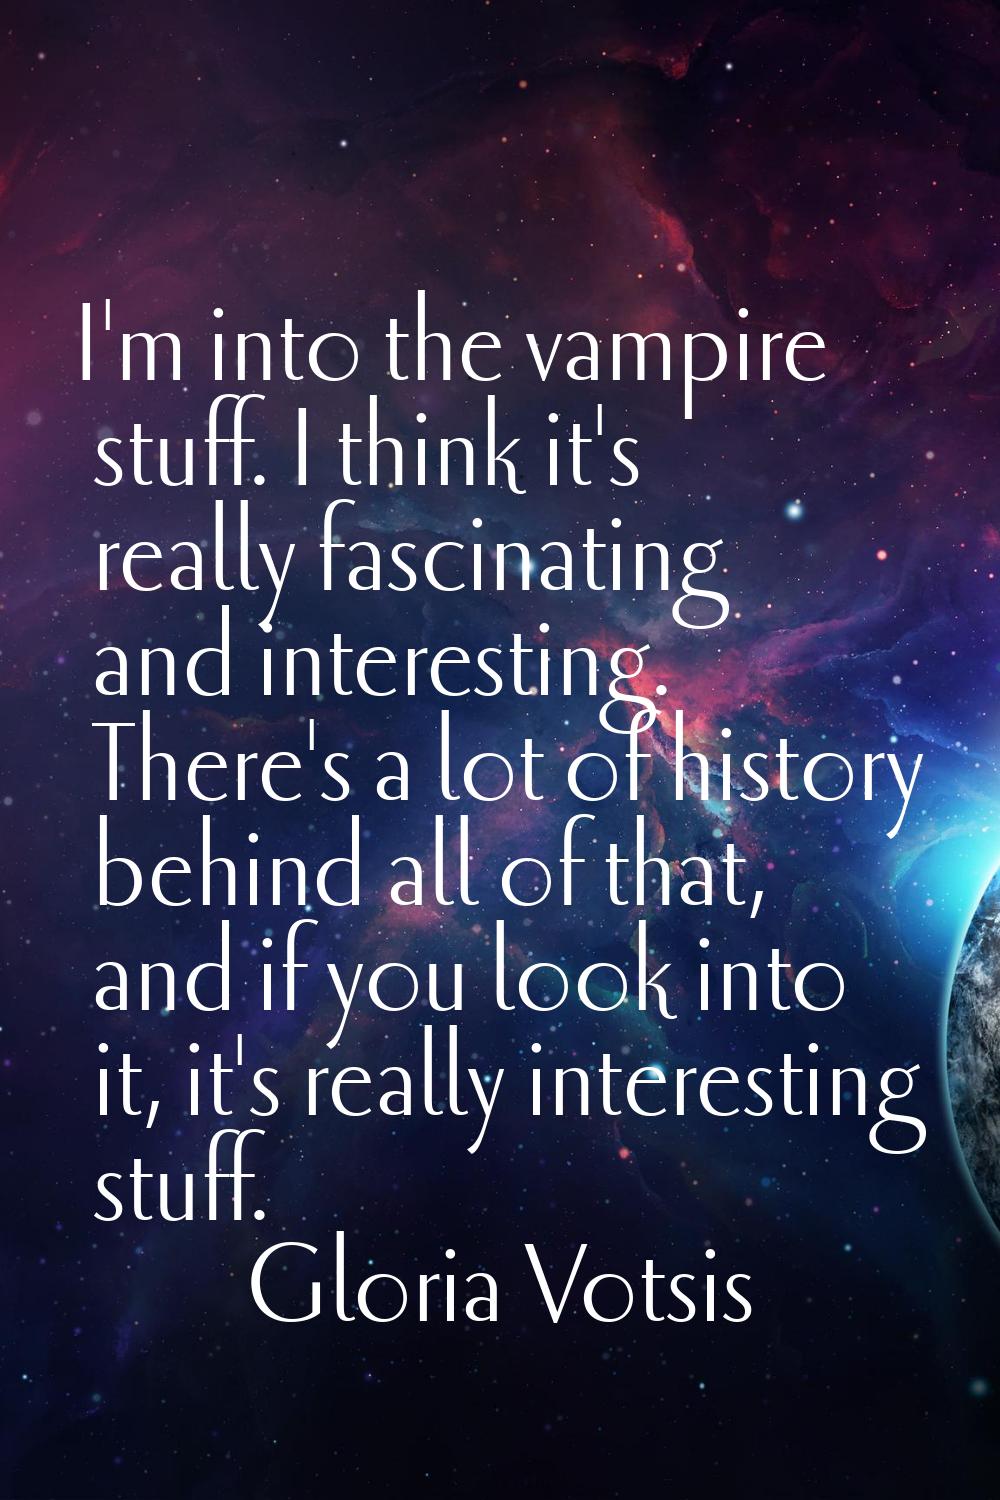 I'm into the vampire stuff. I think it's really fascinating and interesting. There's a lot of histo